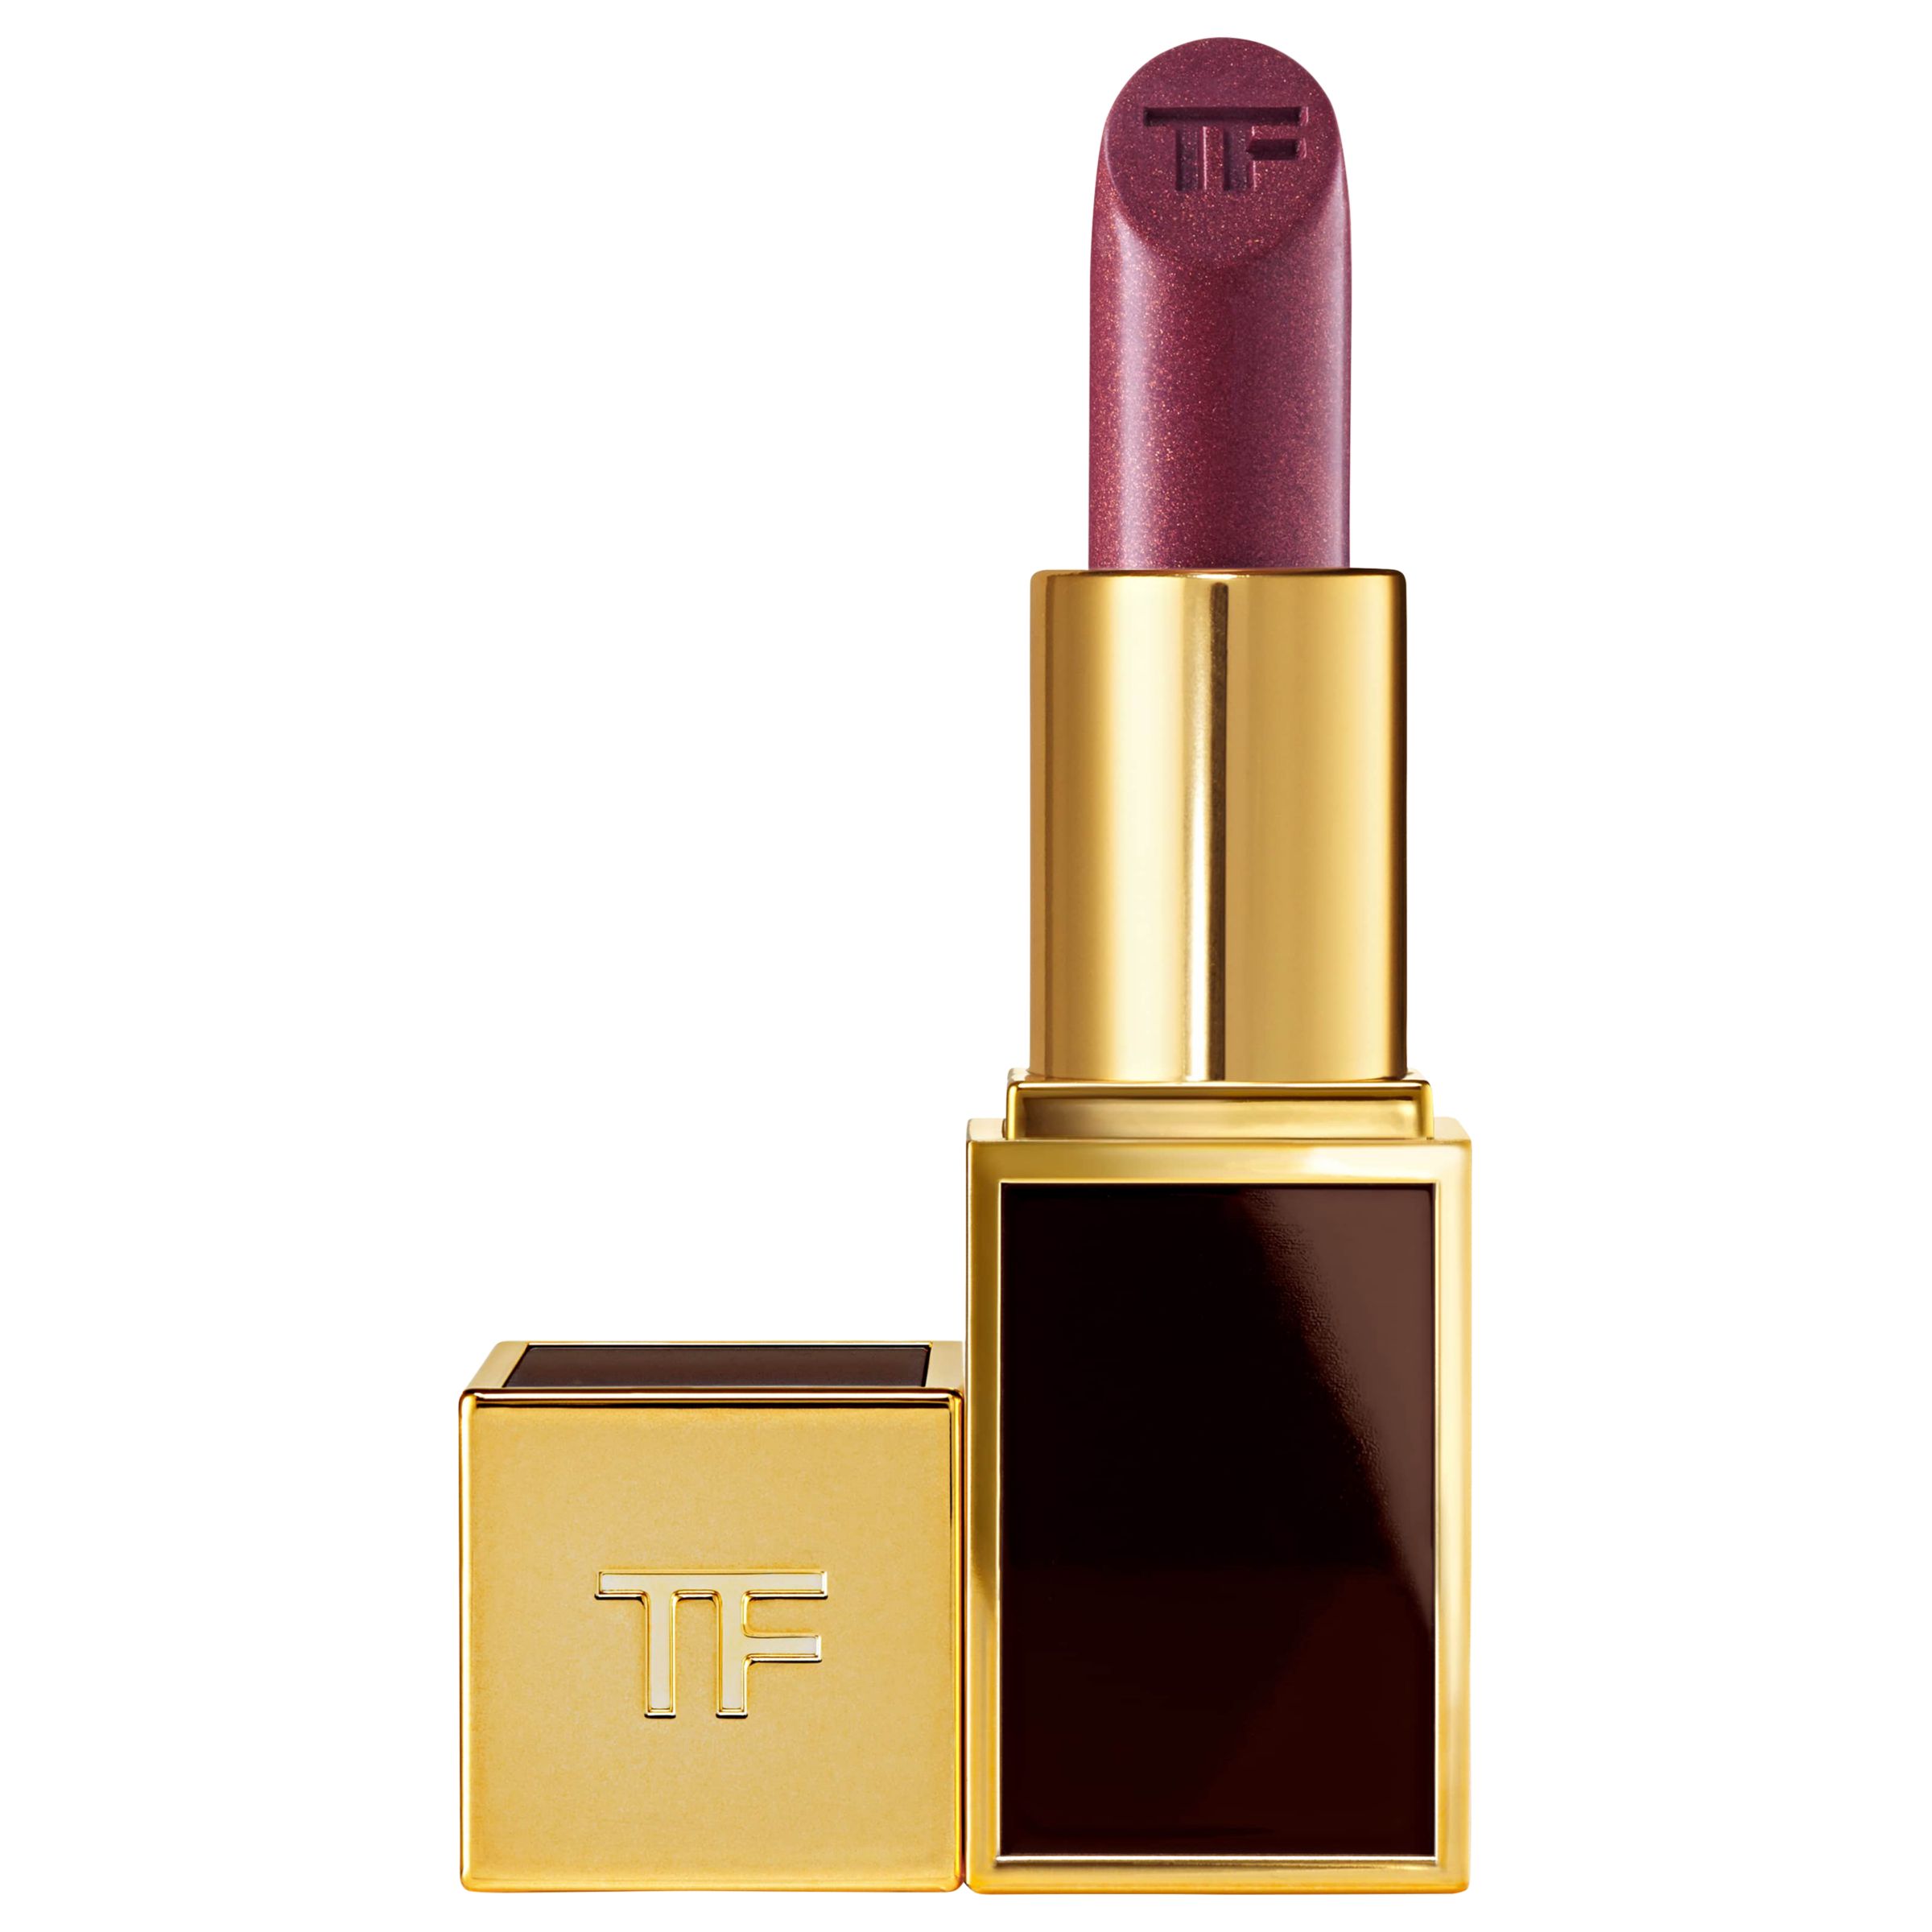 TOM FORD Lip Colour Lips & Boys Collection, Matte